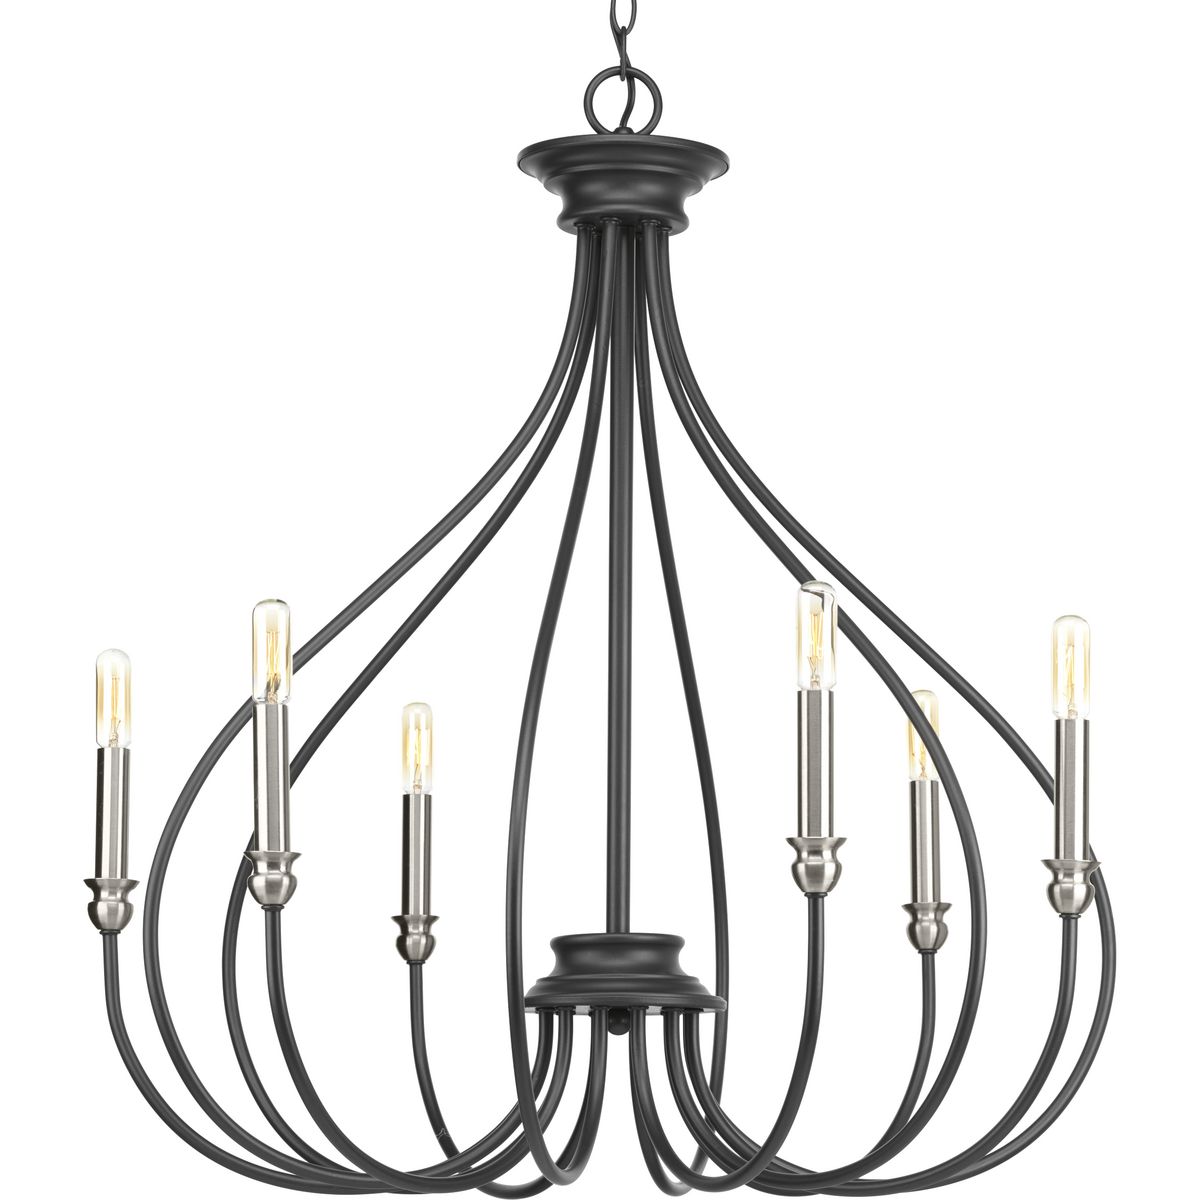 An updated traditional family, Whisp adds distinction to interior spaces. Candles with brushed nickel accents complement a gracefully scrolled frame in a cool Graphite finish. Six-light chandelier perfect for dining room, entry way and kitchens.